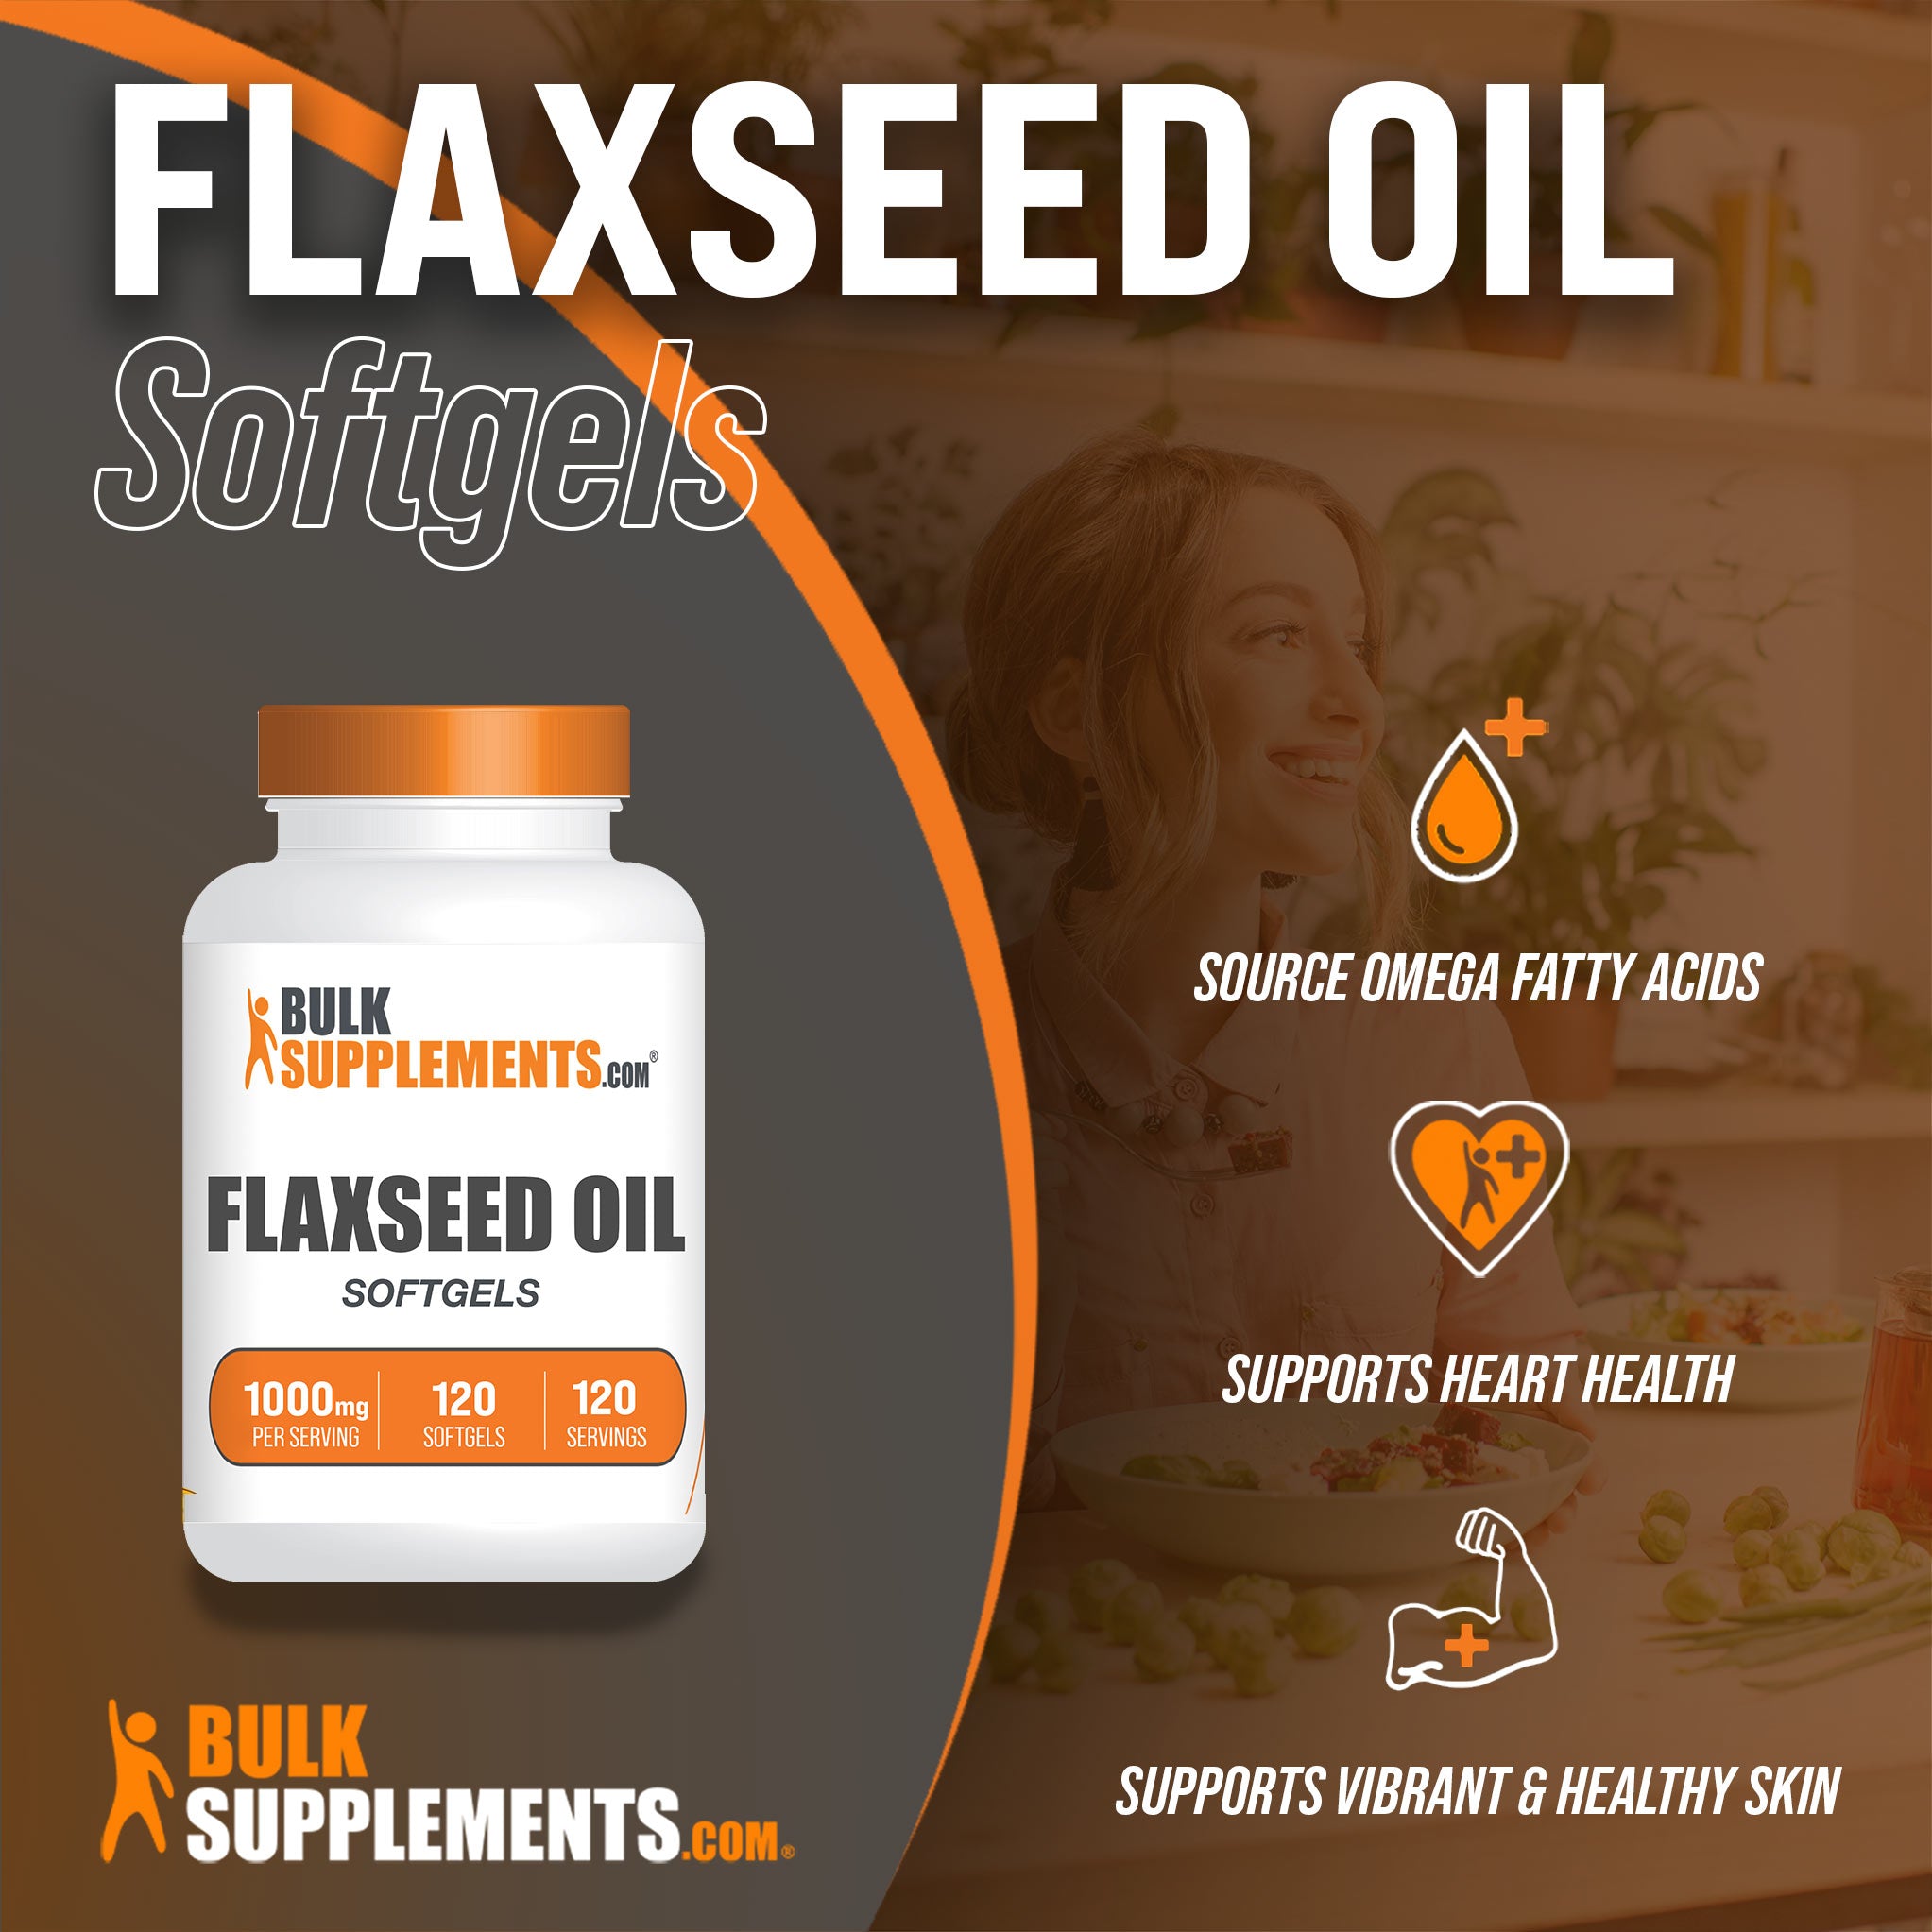 Benefits  of Flaxseed Oil; Source of Omega fatty acids, supports heart health, supports vibrant and healthy skin